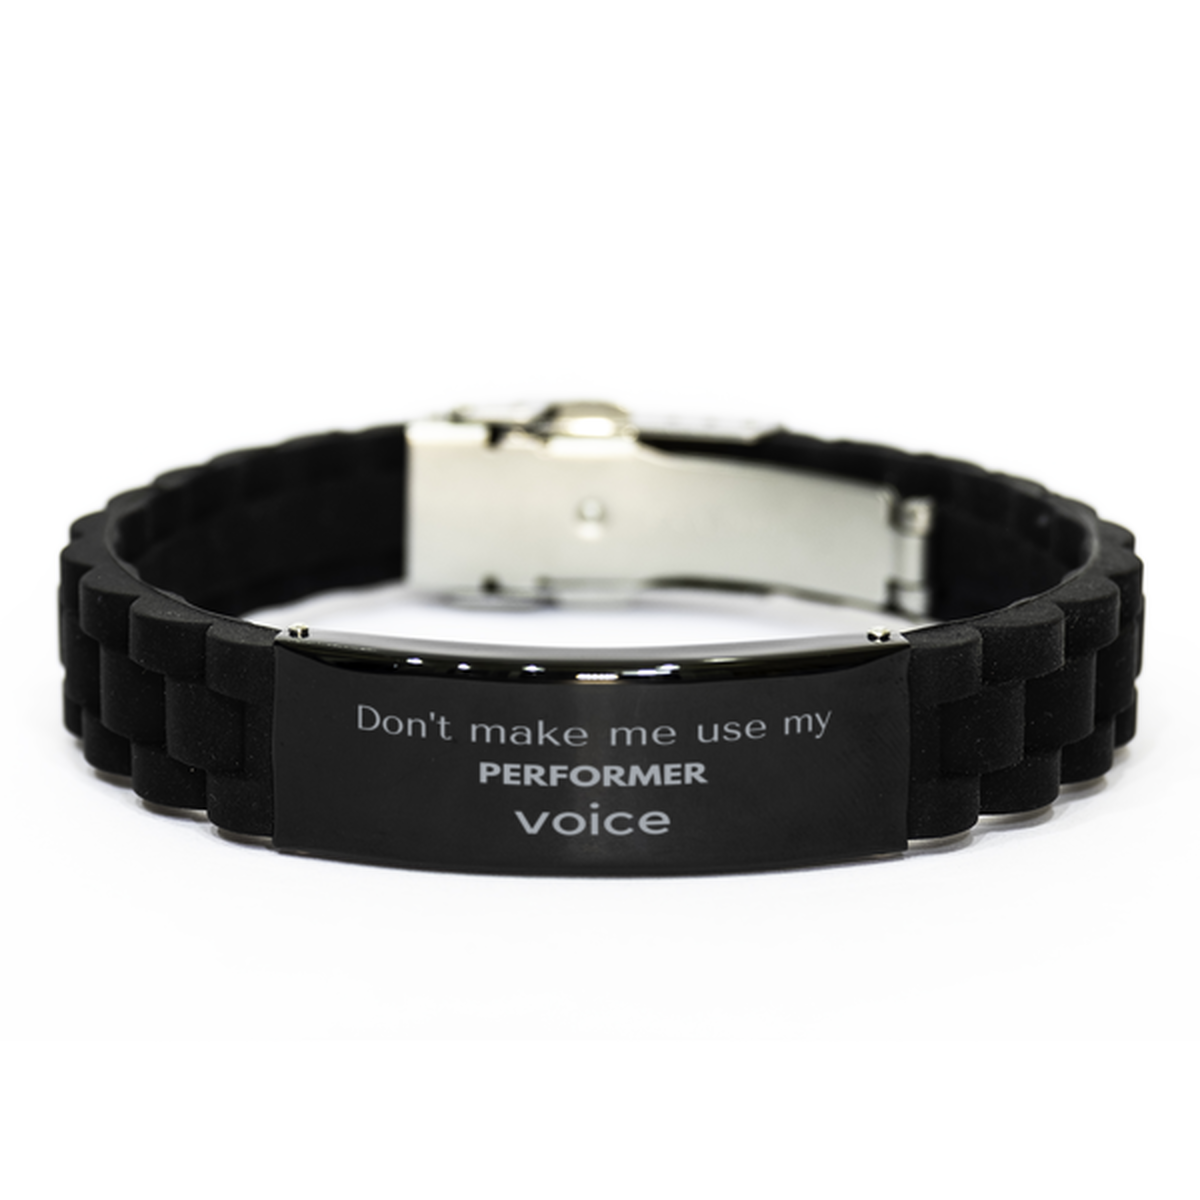 Don't make me use my Performer voice, Sarcasm Performer Gifts, Christmas Performer Black Glidelock Clasp Bracelet Birthday Unique Gifts For Performer Coworkers, Men, Women, Colleague, Friends